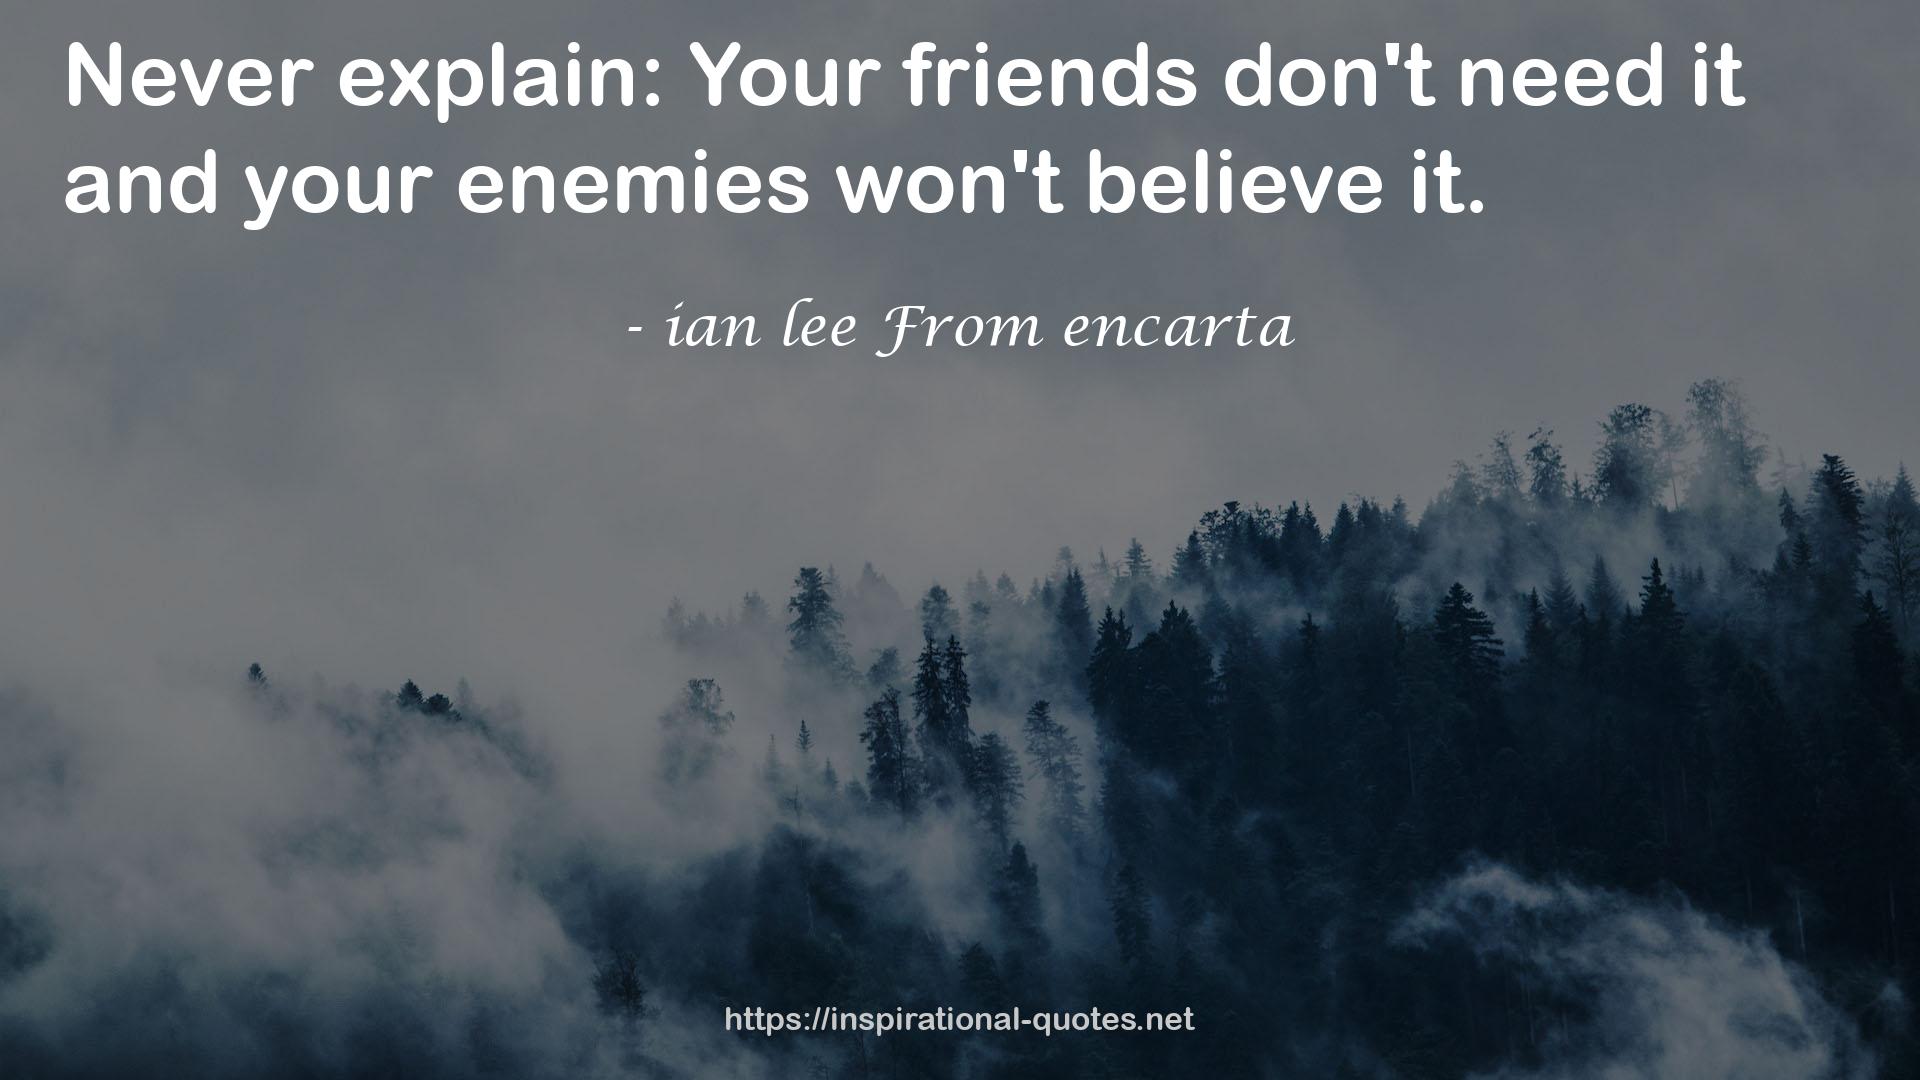 ian lee From encarta QUOTES